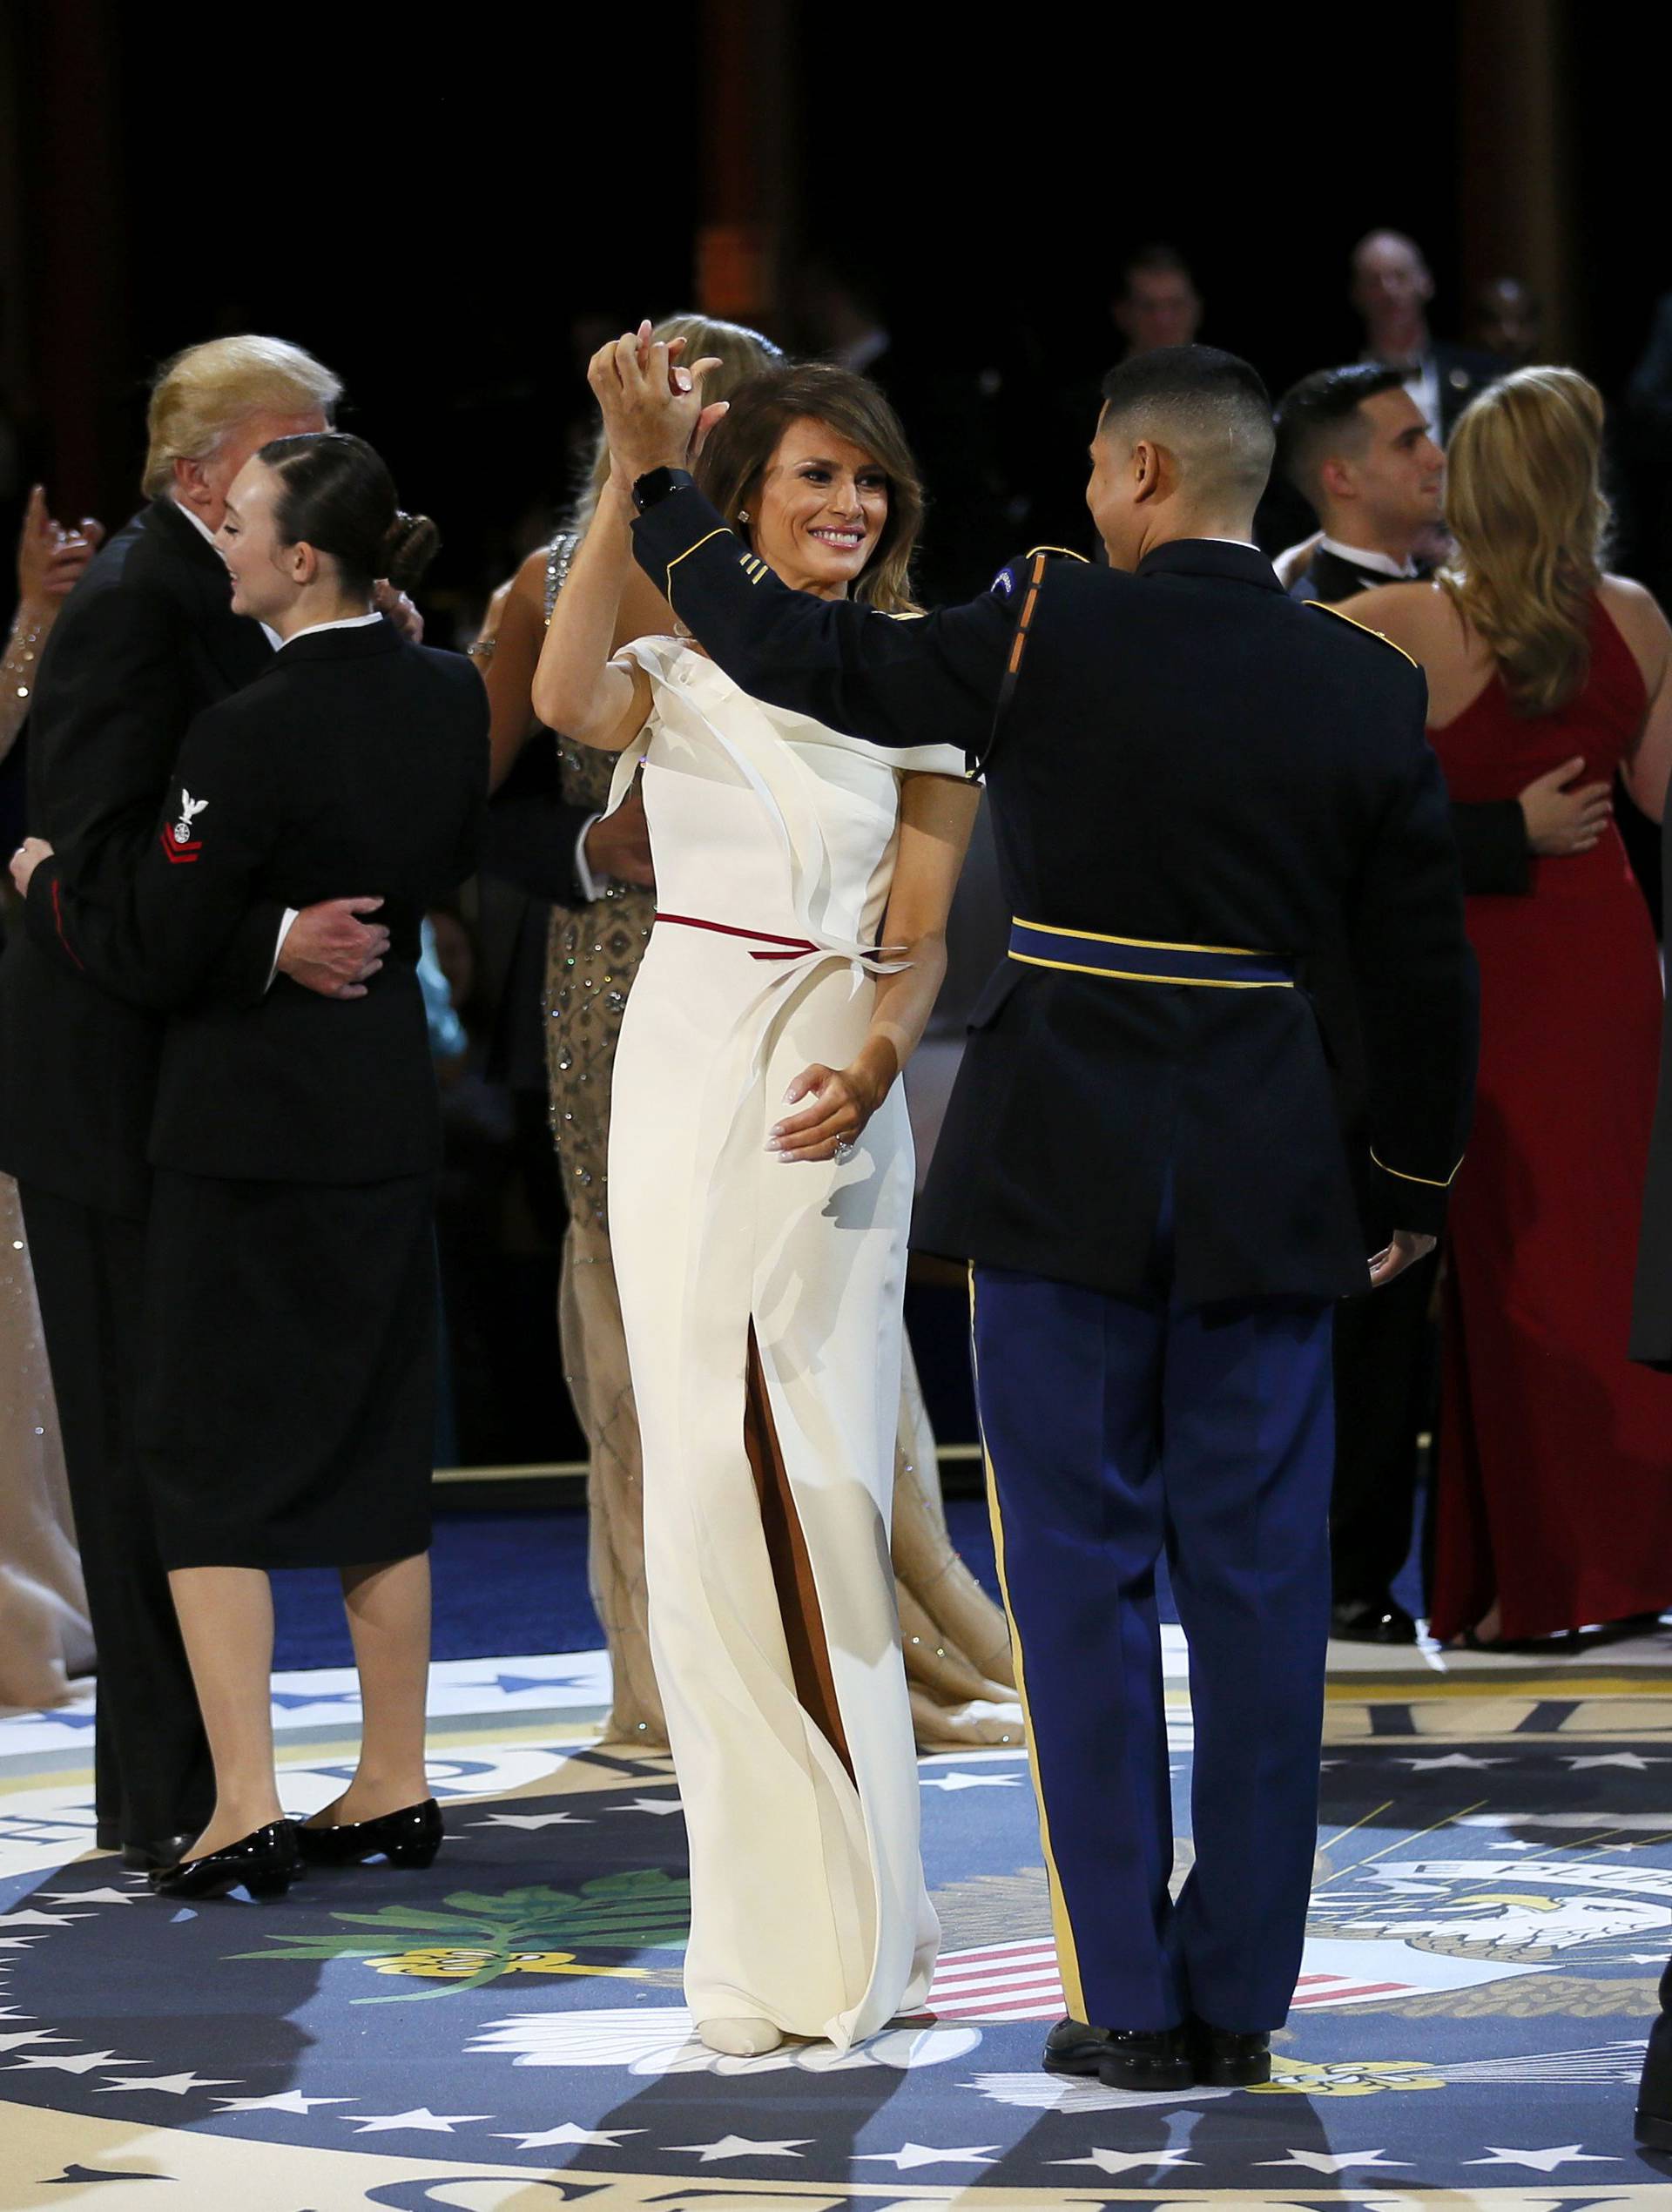 United States Army Staff Sergeant Jose A. Medina dances with U.S. first lady Melania Trump during the "Salute to Our Armed Services Ball" on Inauguration Day in Washington